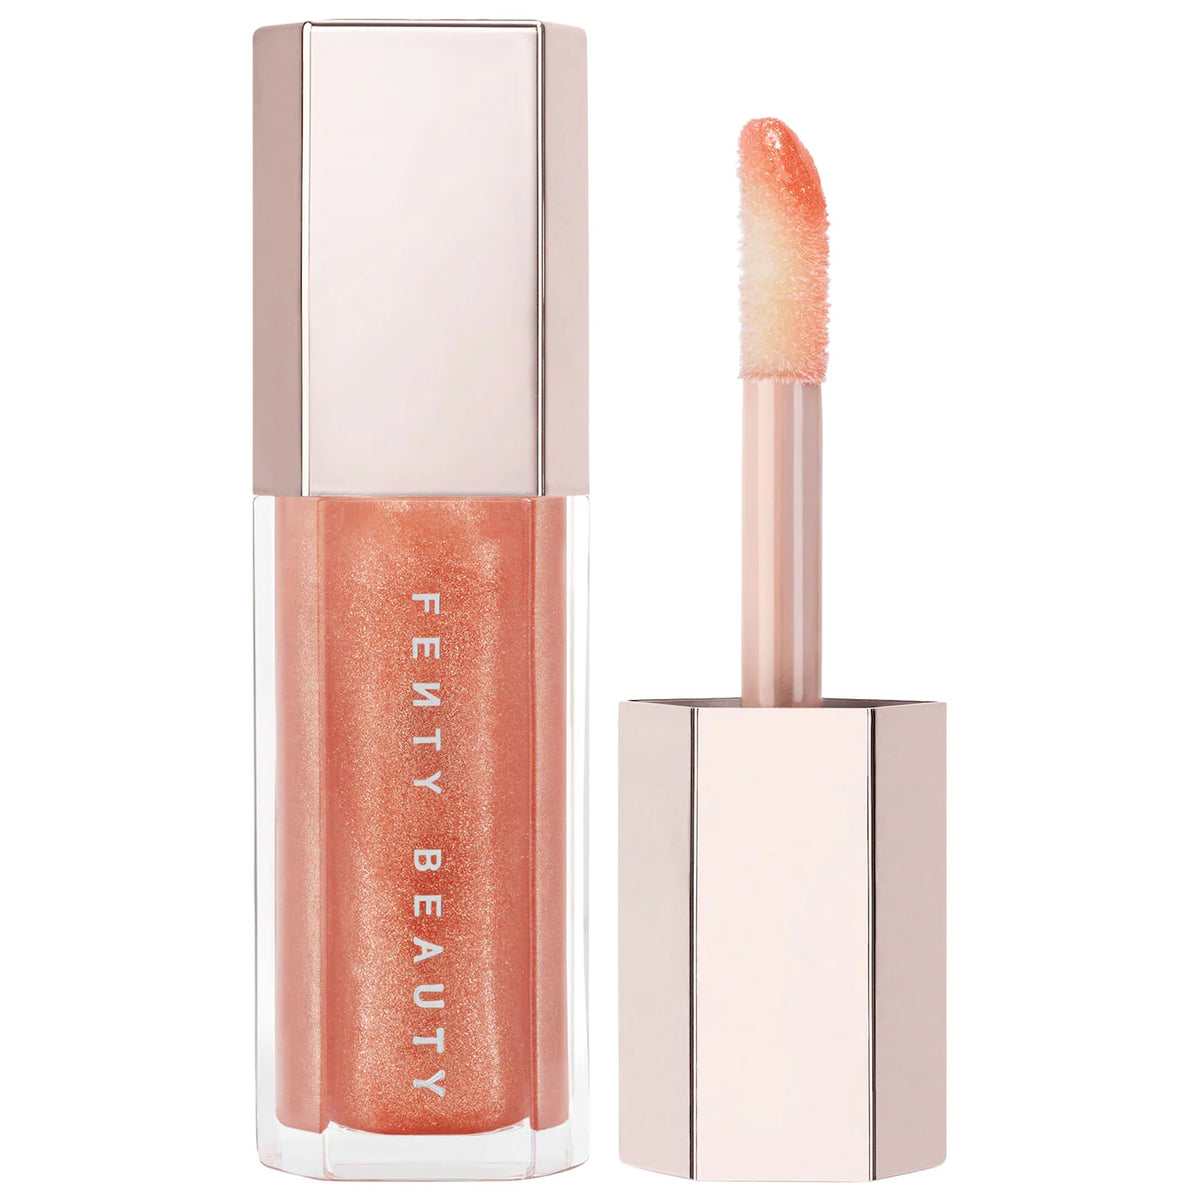 Fenty Beauty by Rihanna Gloss Bomb Universal Lip Luminizer  Volare Makeup CHAMP STAMP FANTASY - SHIMMERING HOLOGRAPHIC GOLD PEARL  